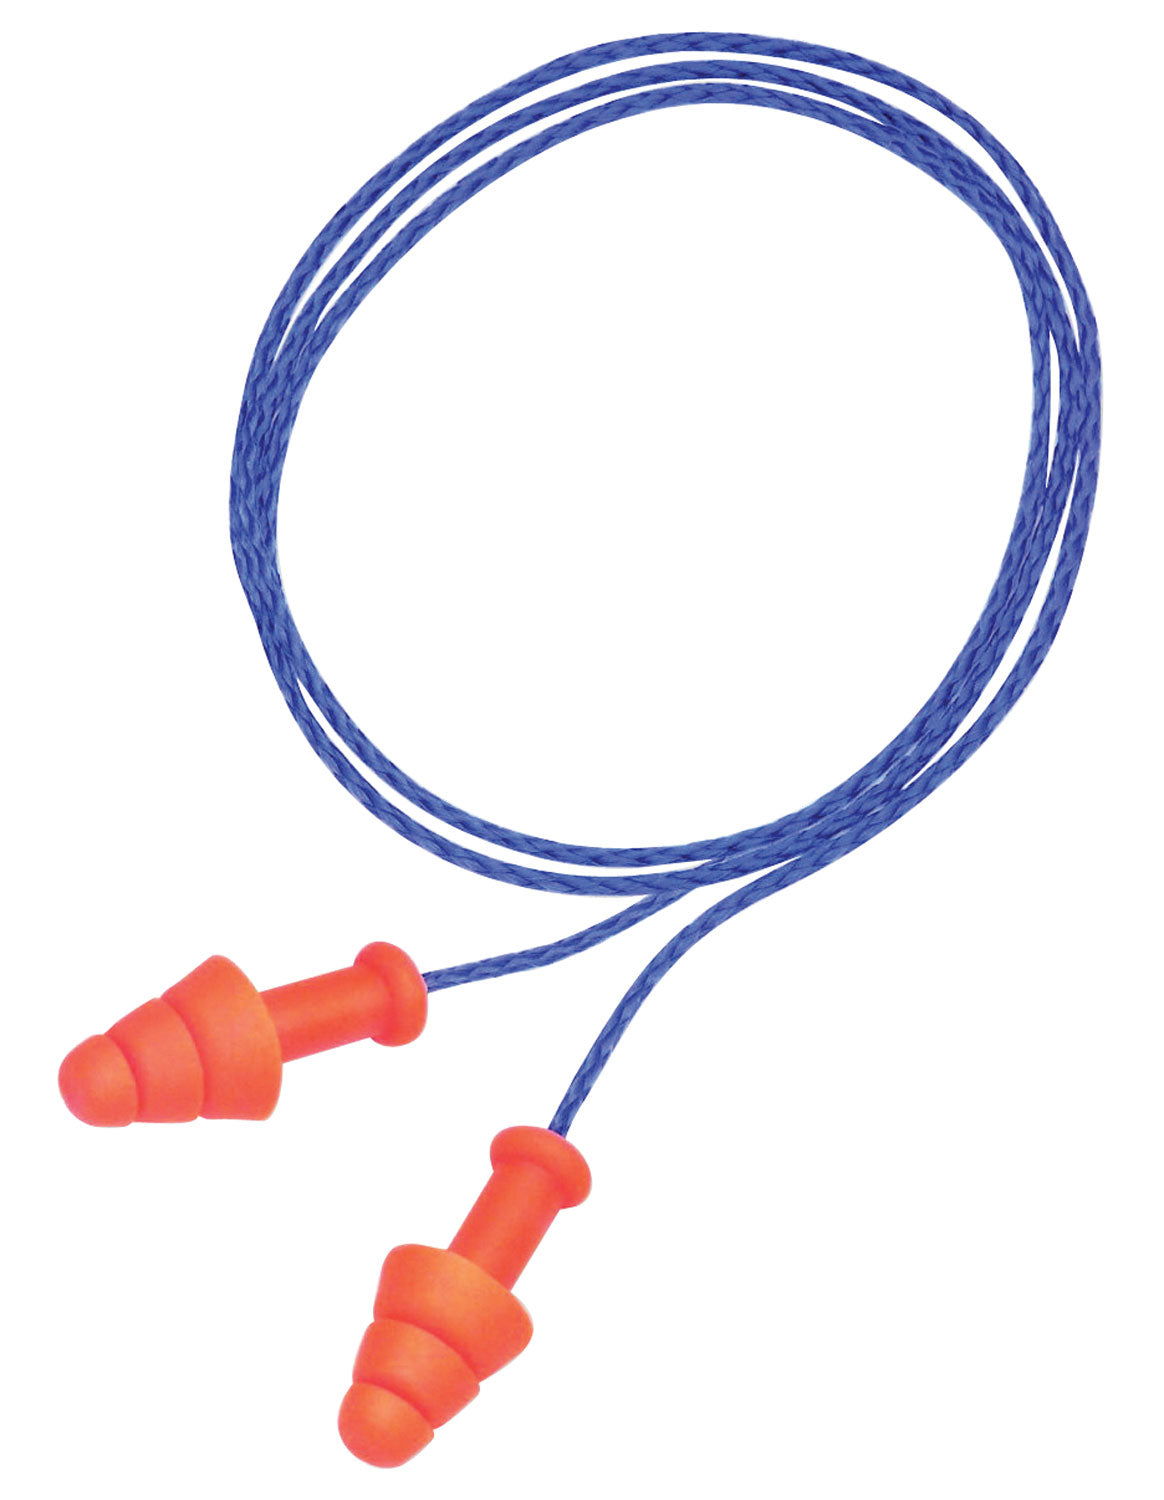 Howard Leight R01520 Corded Ear Plugs Smart Fit Foam 25 DB Behind The Neck Orange Ear Buds With Blue Cord Adult 2 Pair